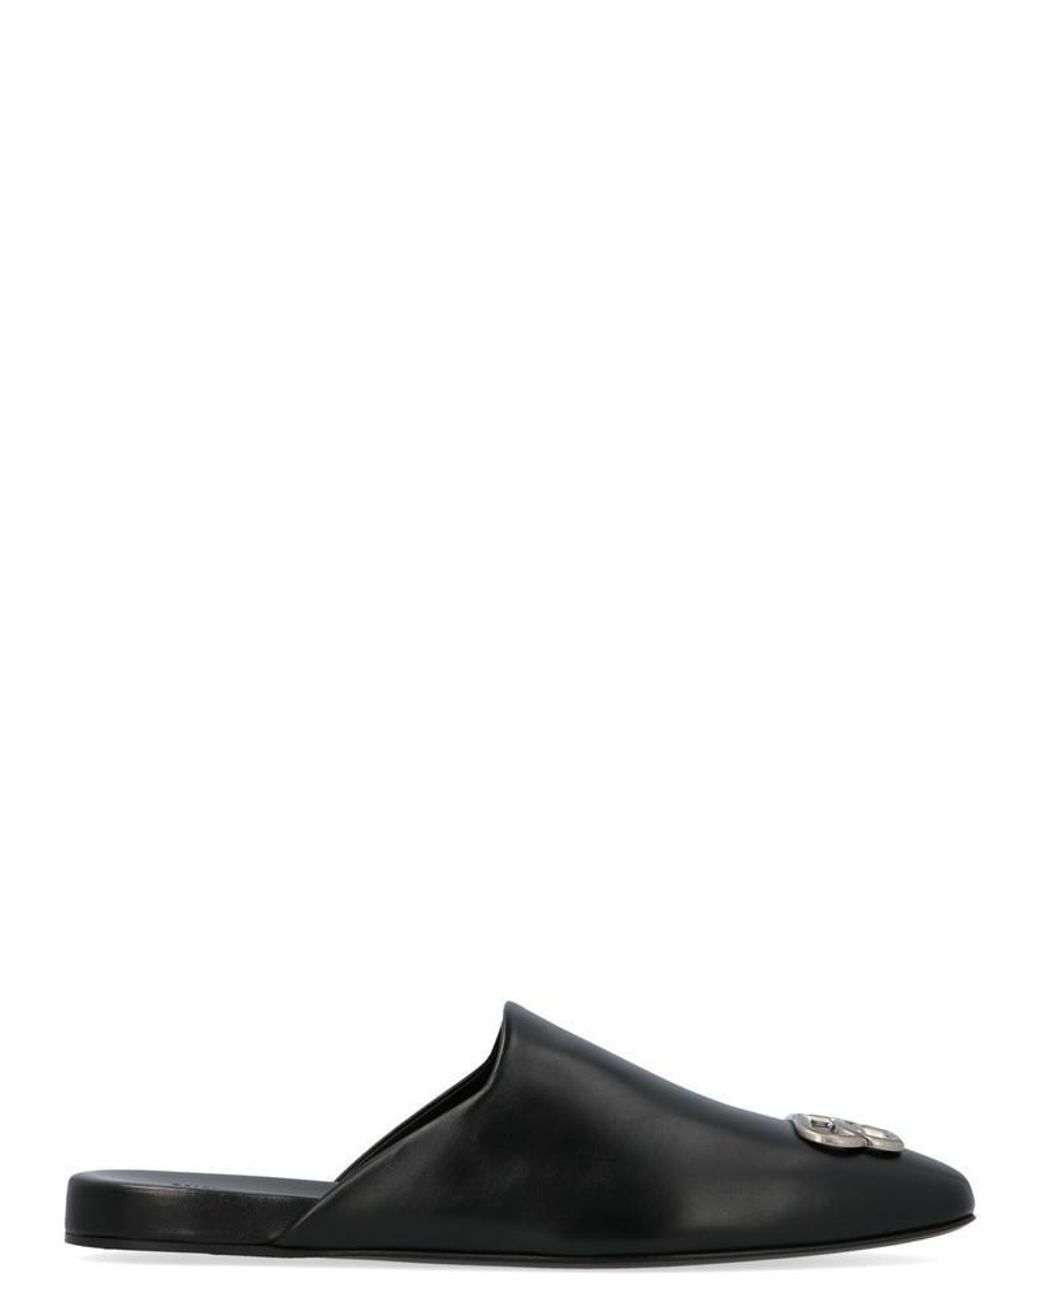 Balenciaga Leather Cosy Bb Mules in Black for Men - Save 16% - Lyst